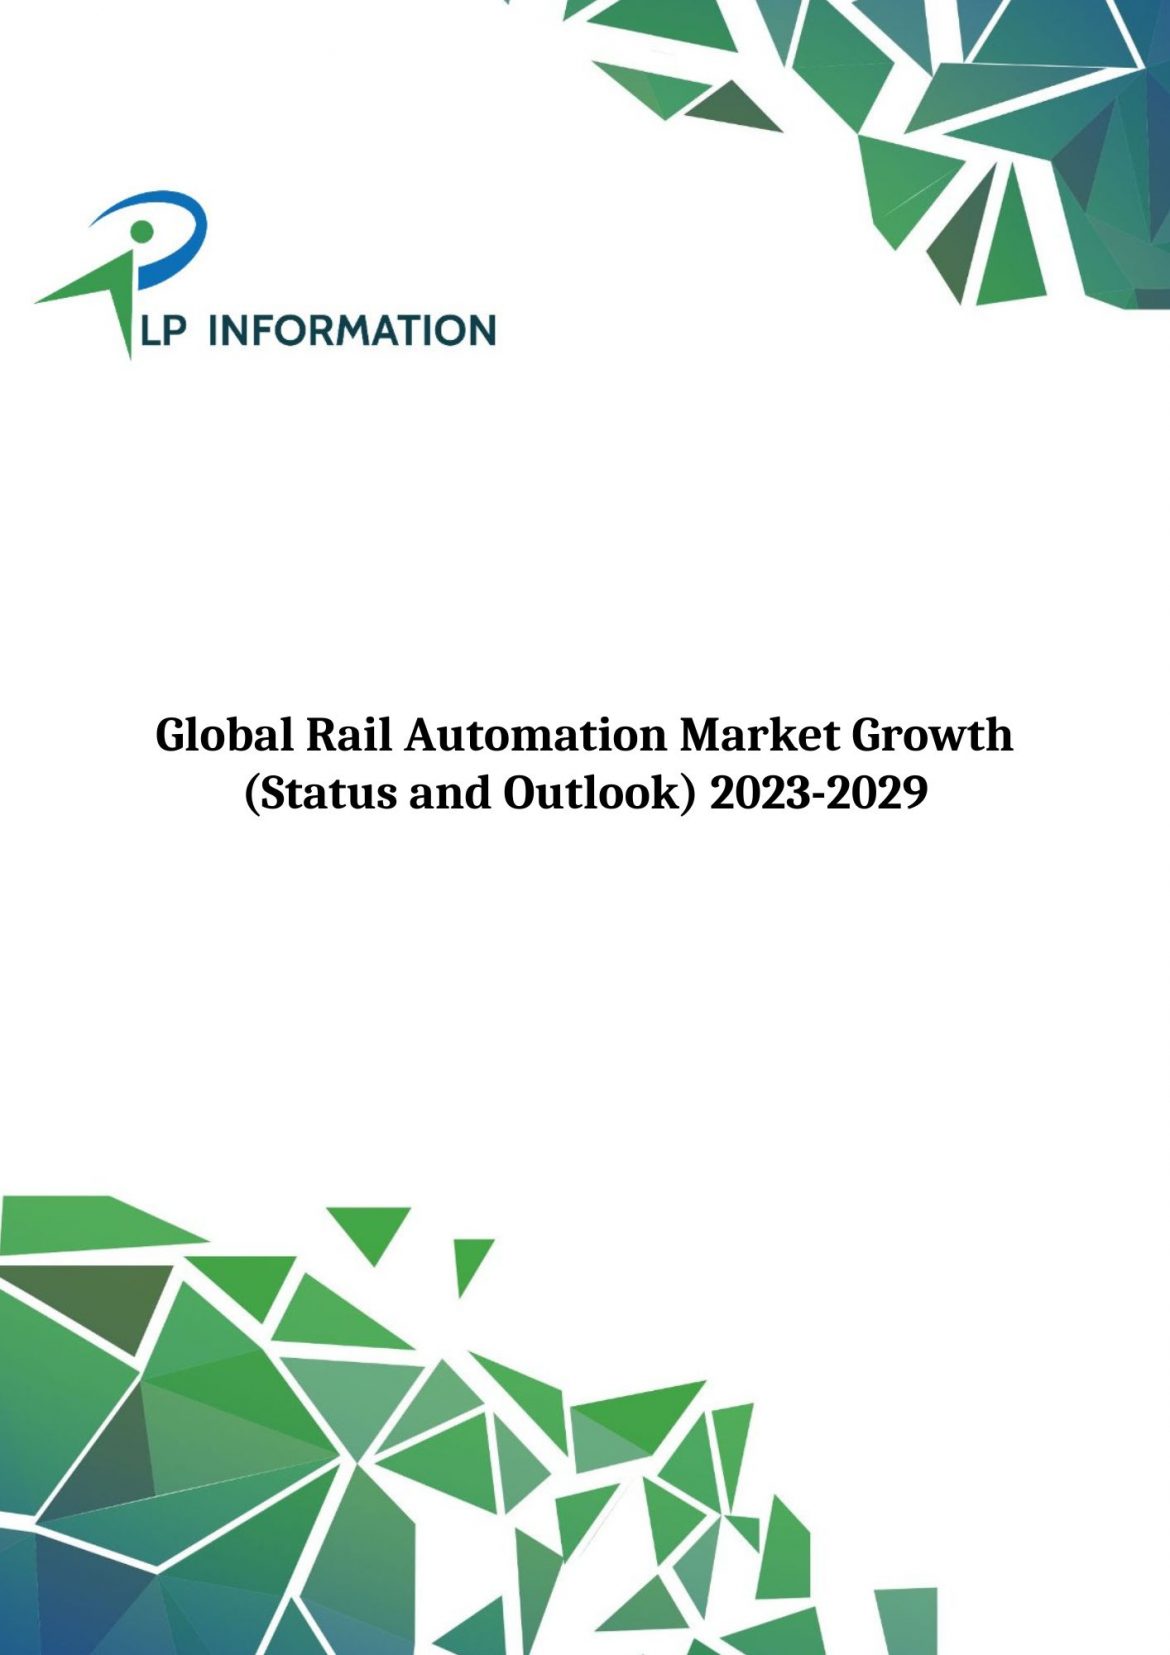 Global Rail Automation Market Growth (Status and Outlook) 2023-2029